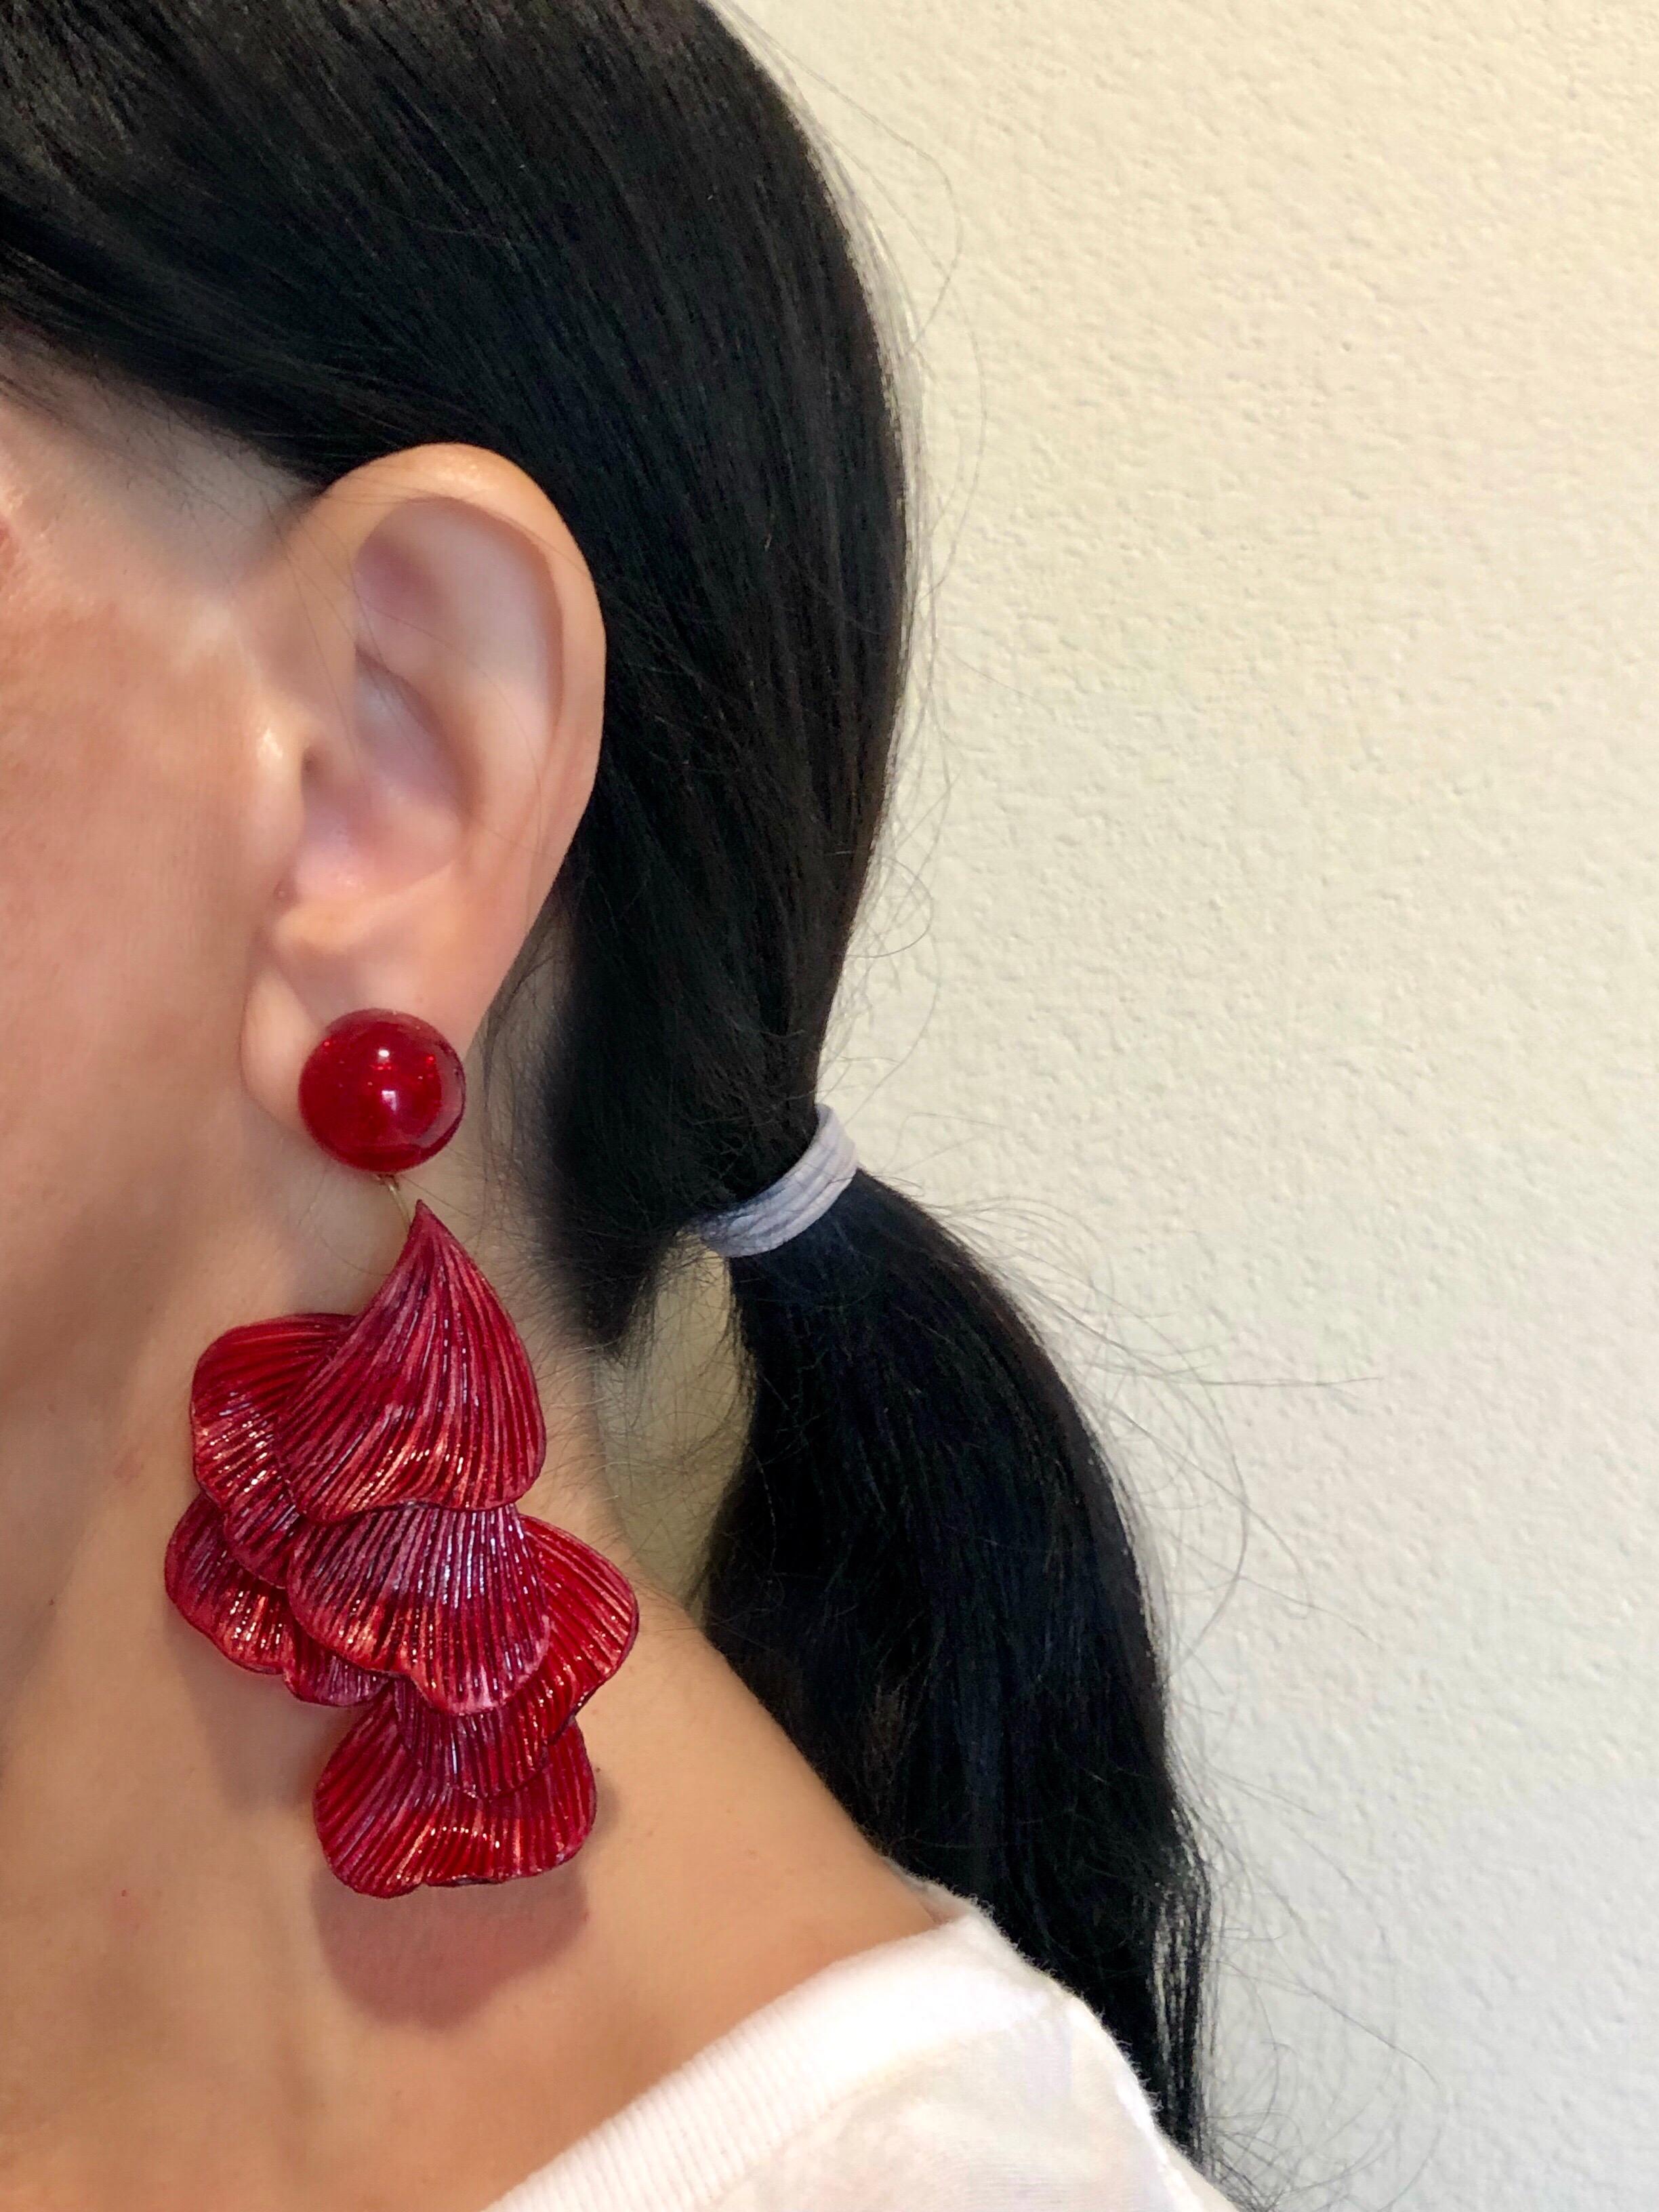 Light and easy to wear, these handmade artisanal pierced earrings were made in Paris by Cilea. The lightweight clip-on earrings feature molded wave segments of enameline (enamel and resin composite) in deep red, almost resembling whimsical fish